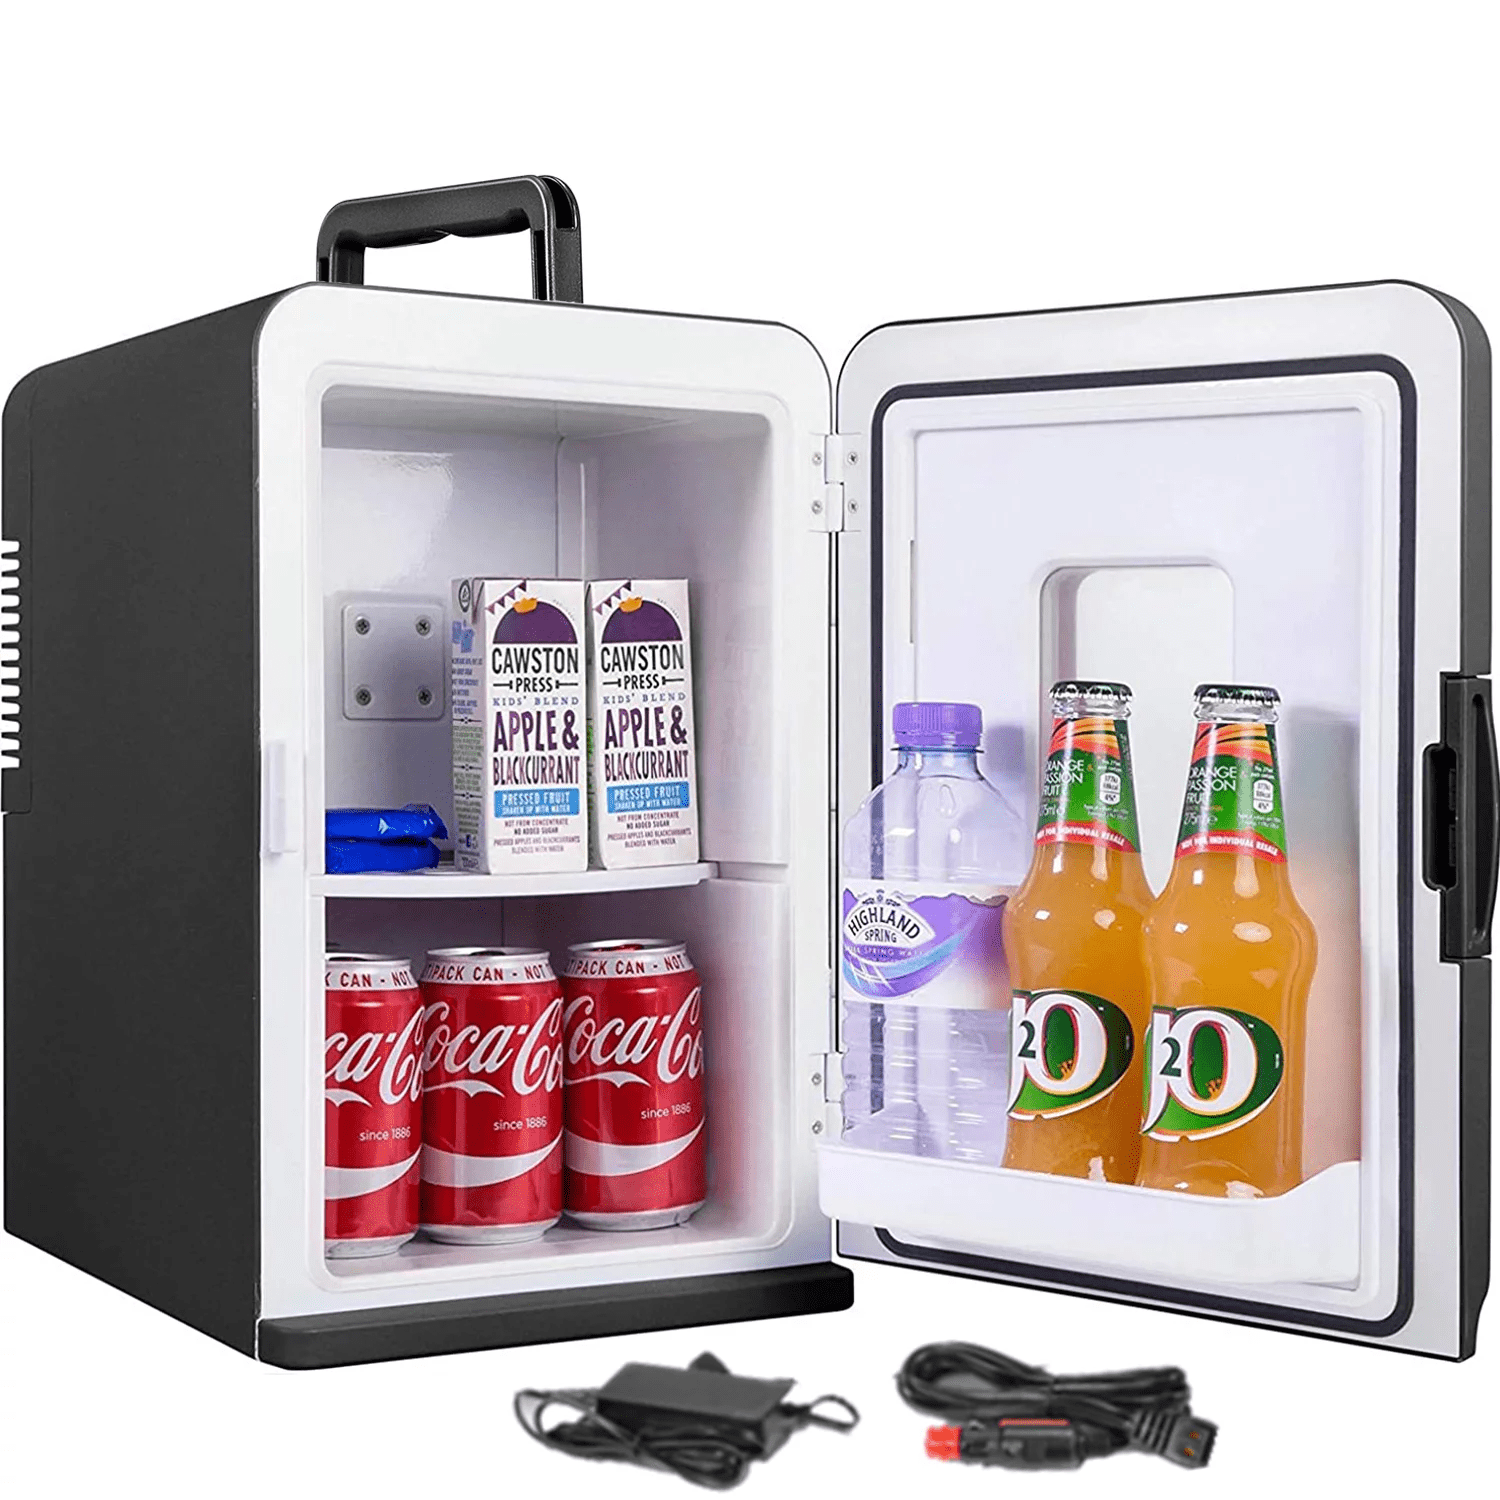 Mini Fridge 15 Liter/21 Cans, AC+DC Power Small Fridge for Bedroom, Car,  Office, Thermoelectric Cooler and Warmer Skincare Fridge for Food, Drinks